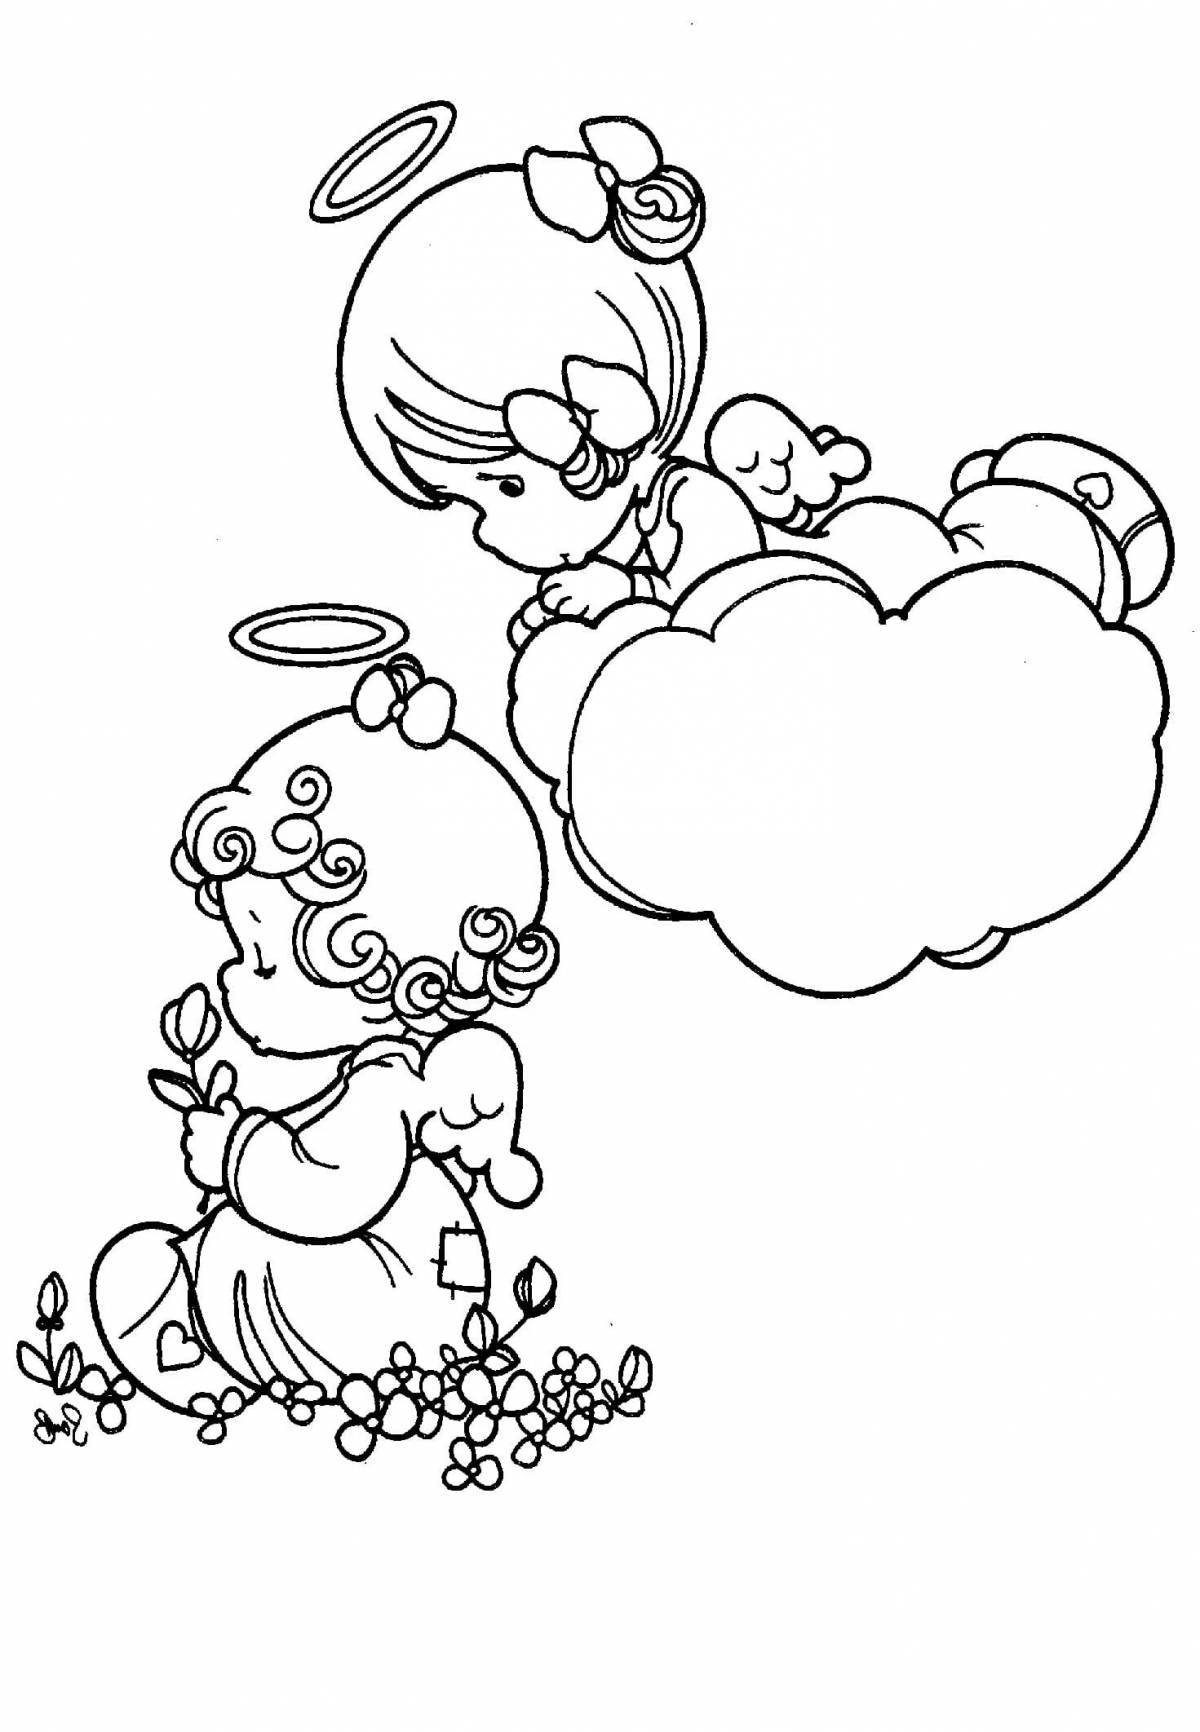 Luminous thank you coloring page for kids